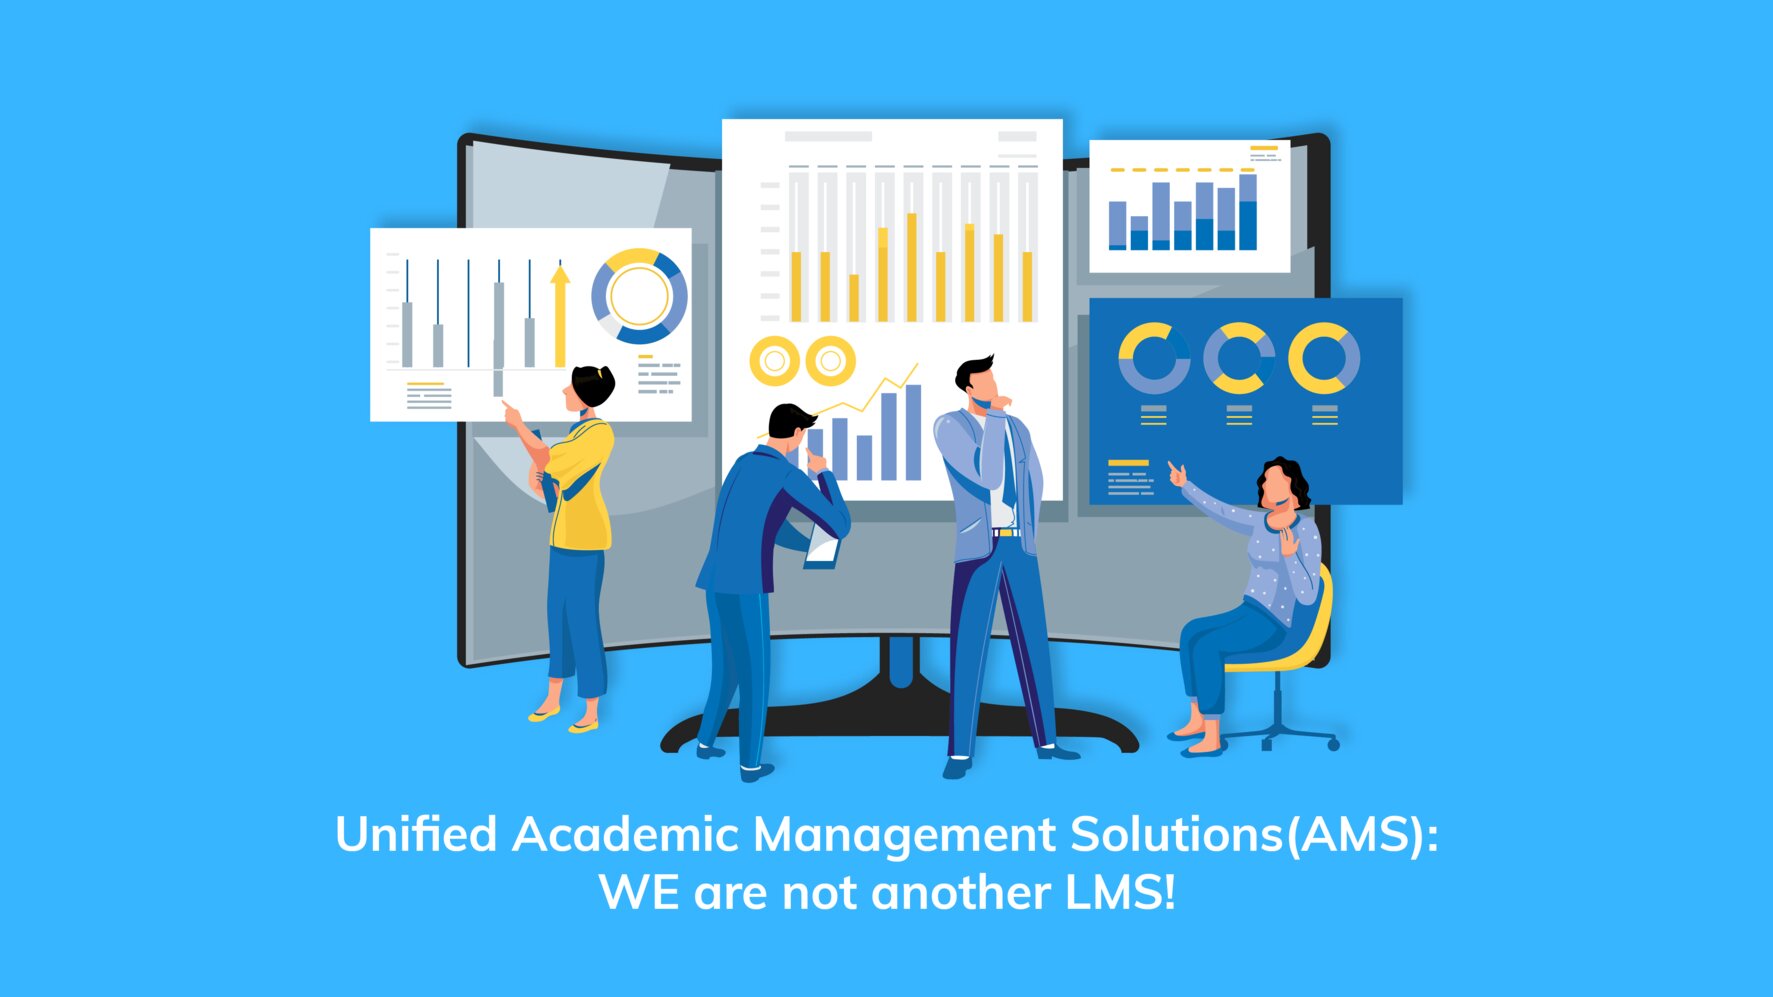 Unified Academic Management Solutions(AMS): WE are not another LMS!